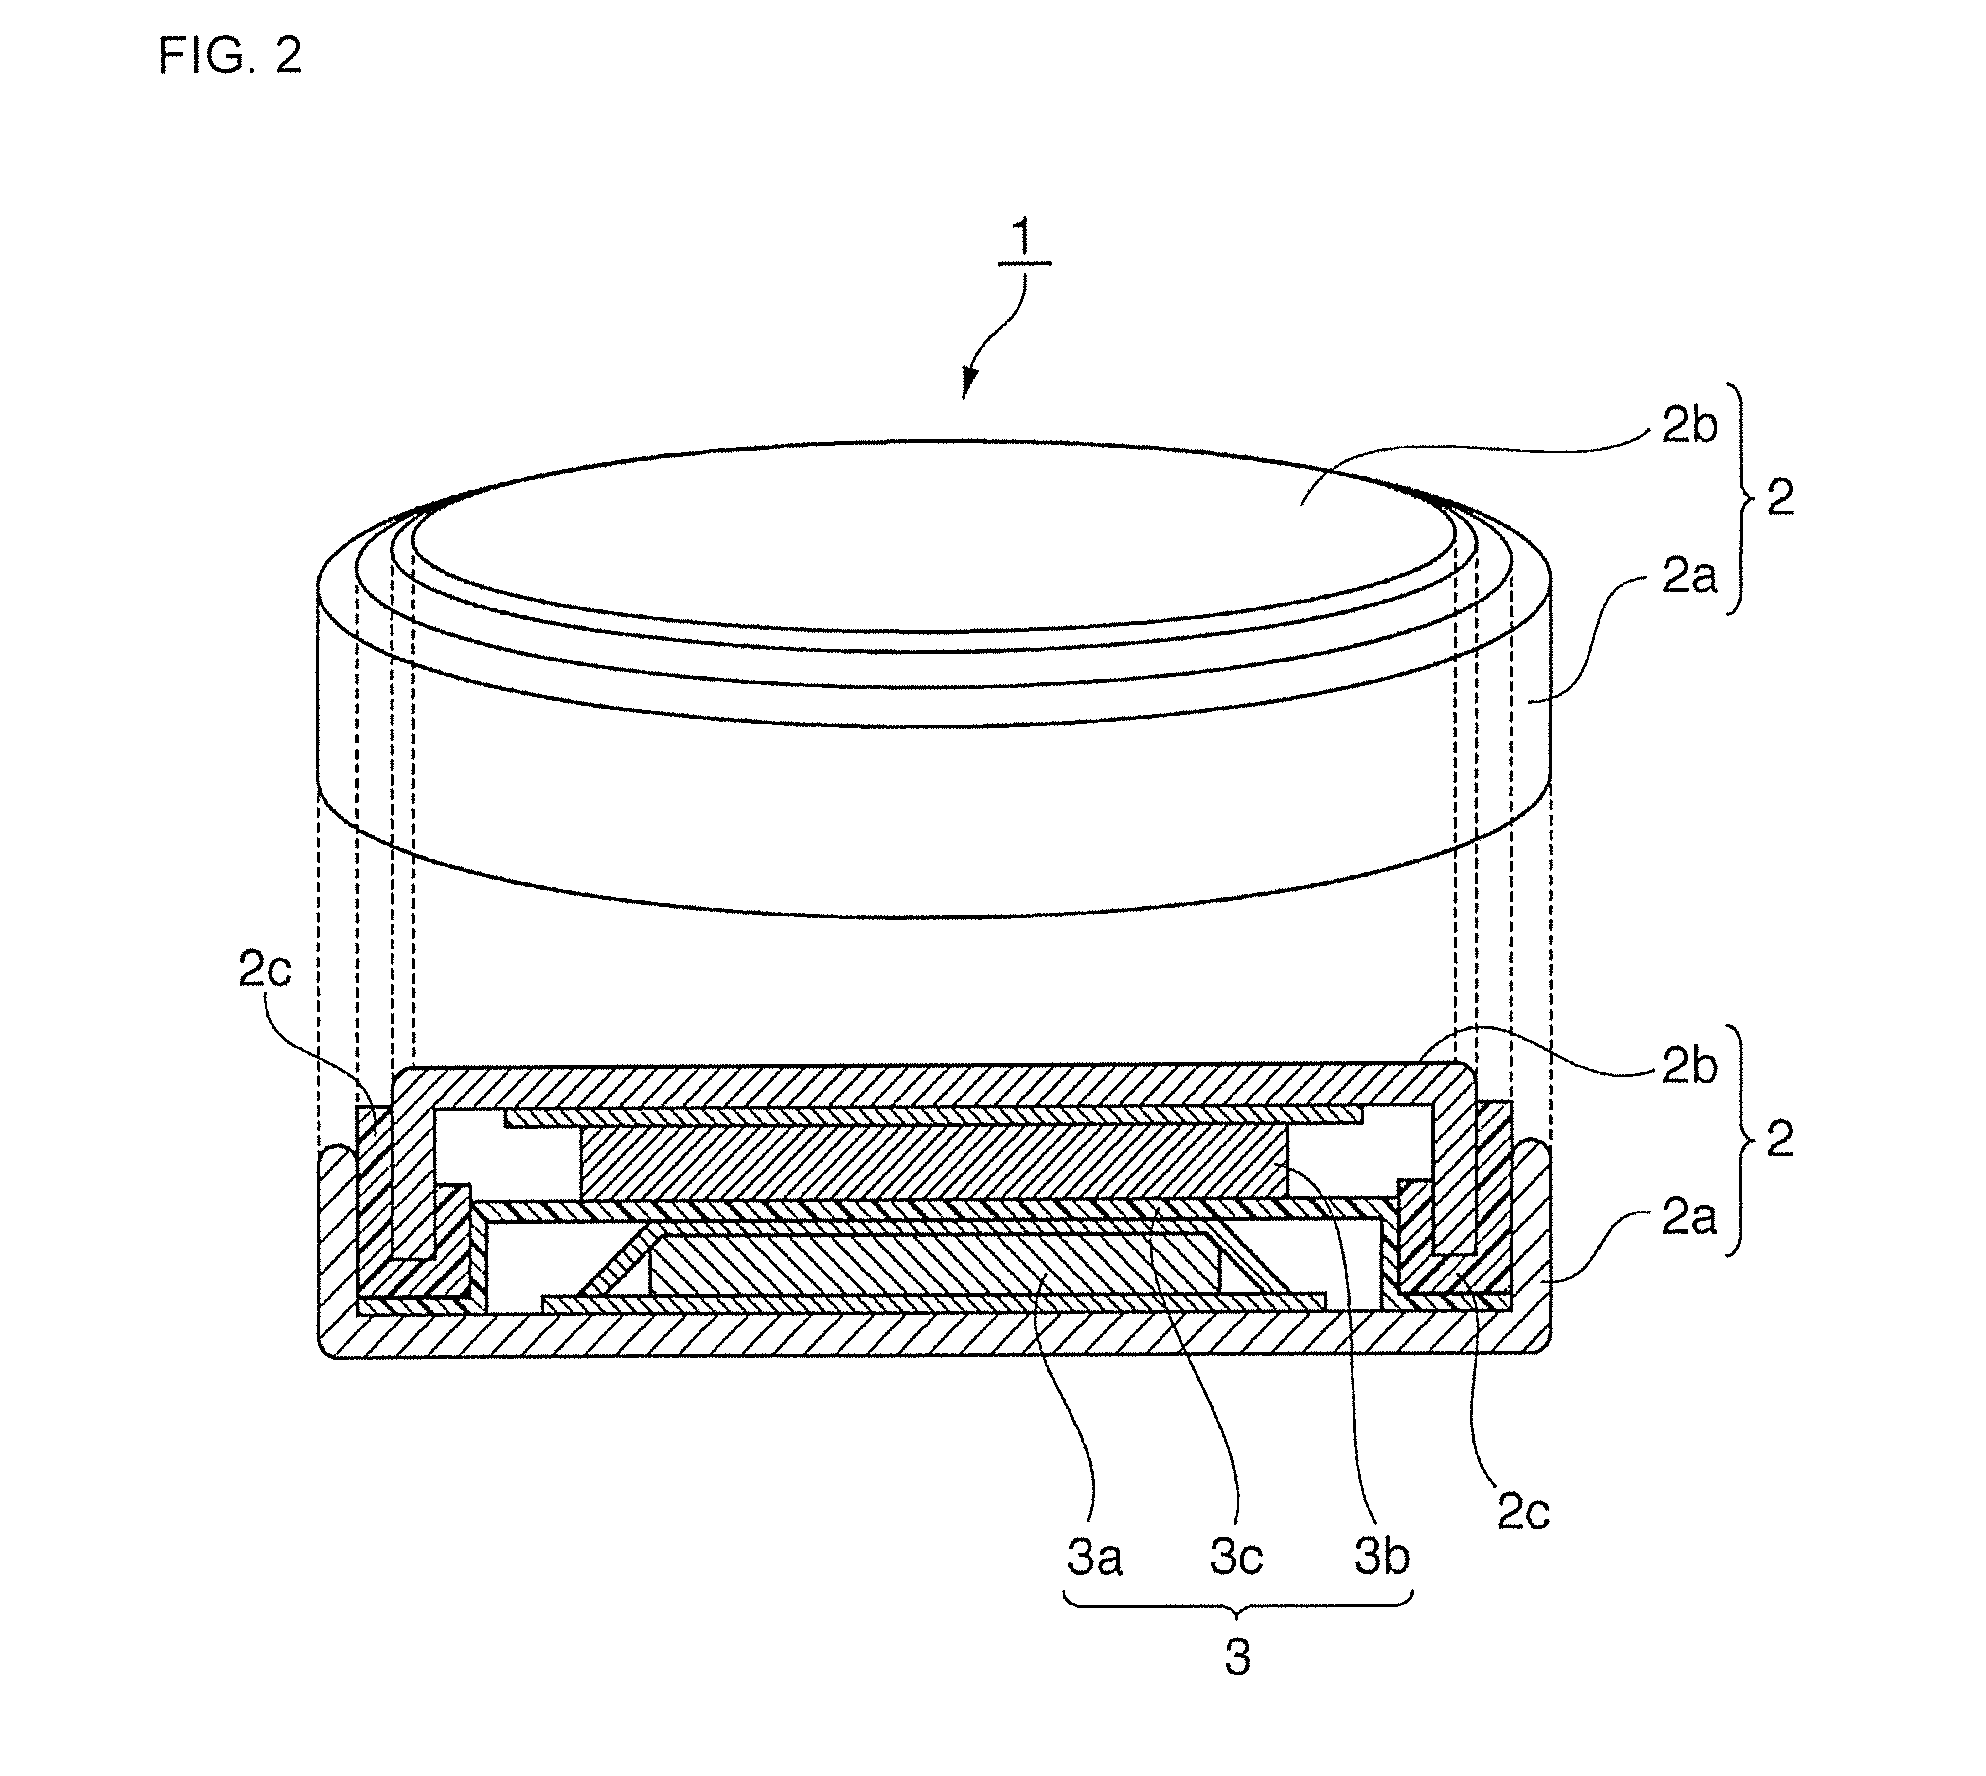 Positive-electrode material for nonaqueous-electrolyte secondary battery, method for manufacturing the same, and nonaqueous-electrolyte secondary battery using said positive-electrode material